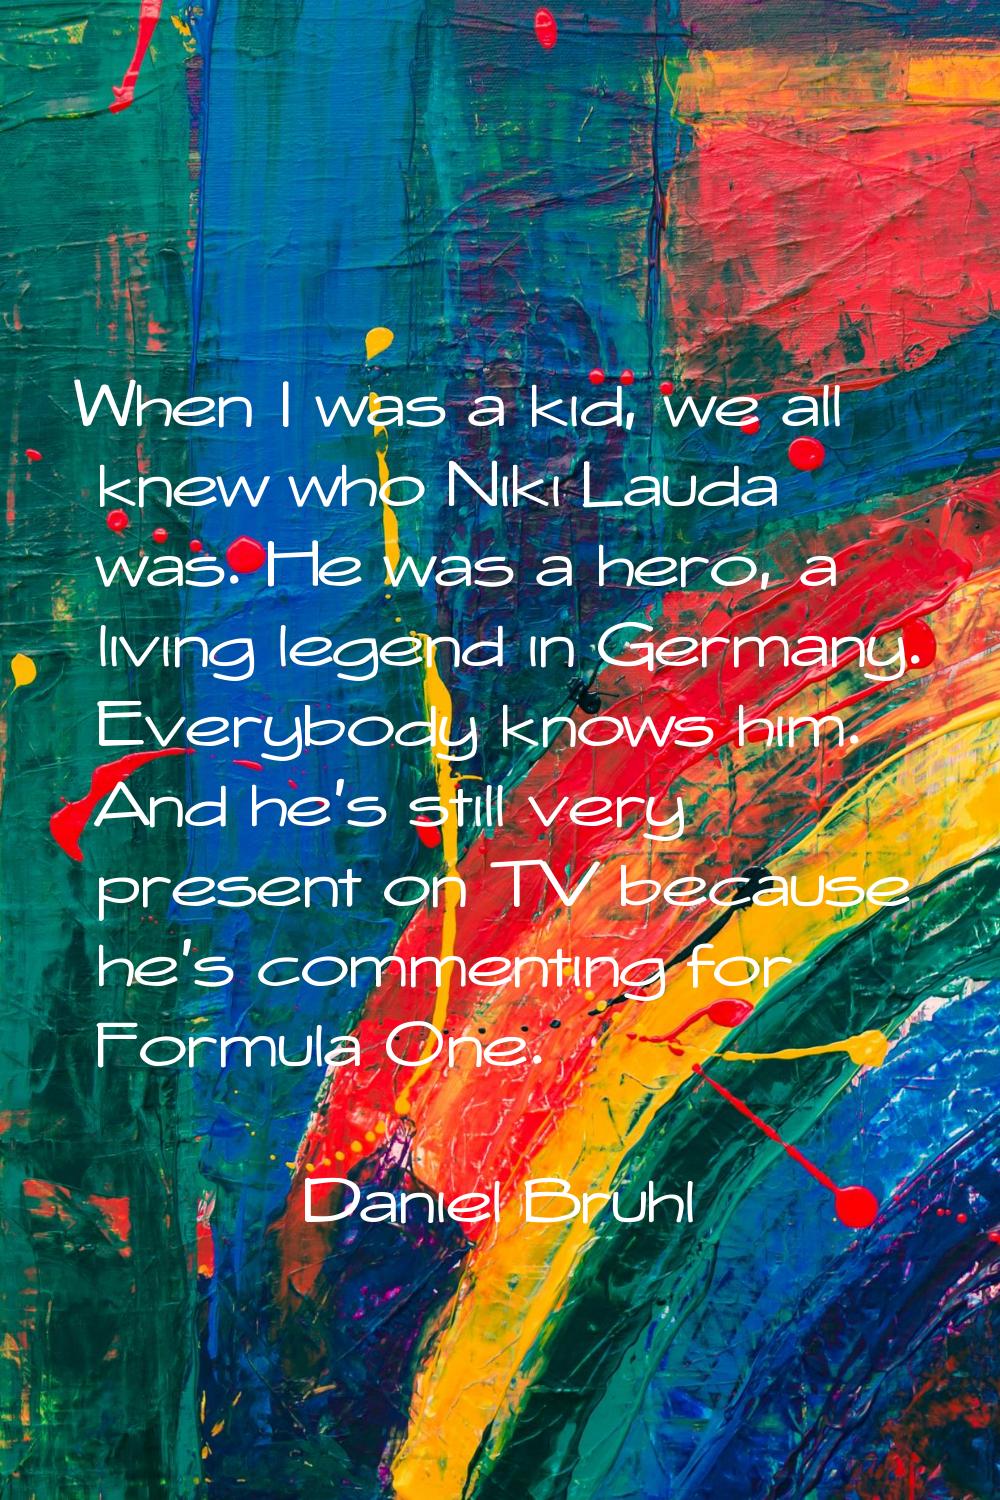 When I was a kid, we all knew who Niki Lauda was. He was a hero, a living legend in Germany. Everyb